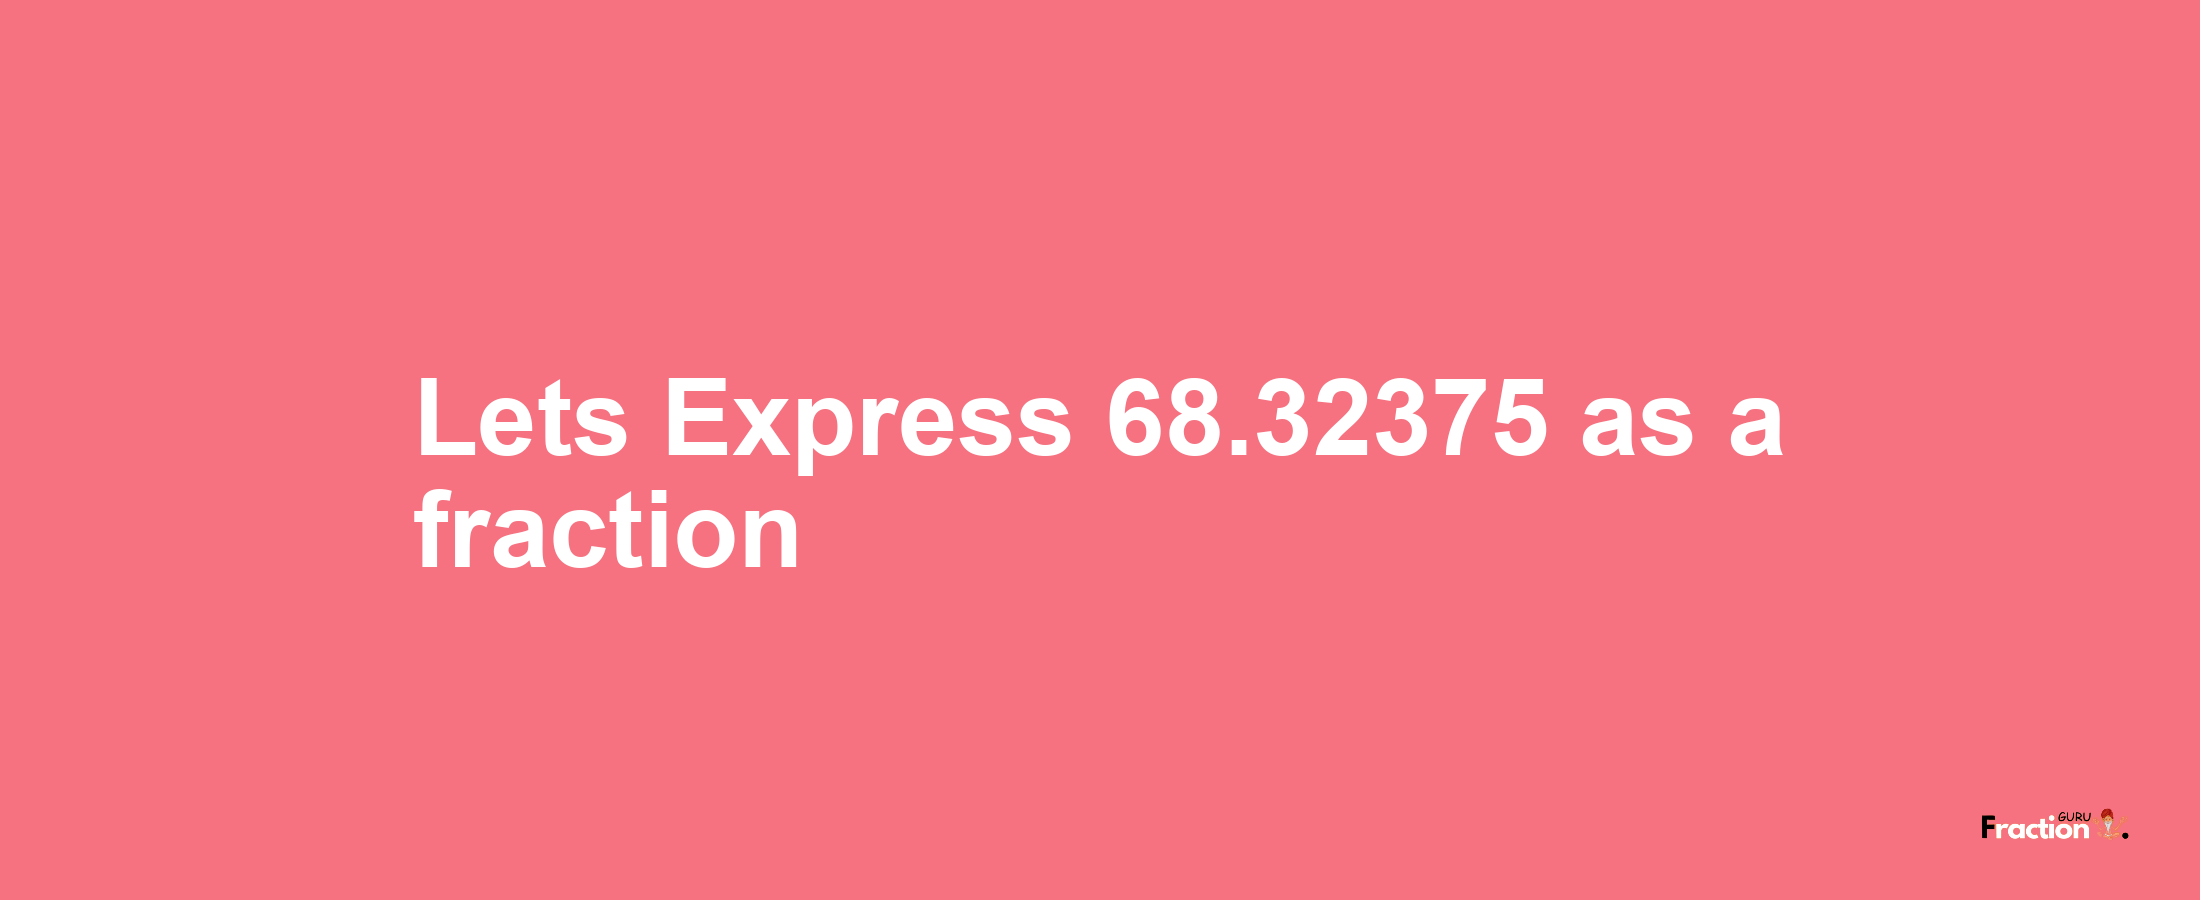 Lets Express 68.32375 as afraction